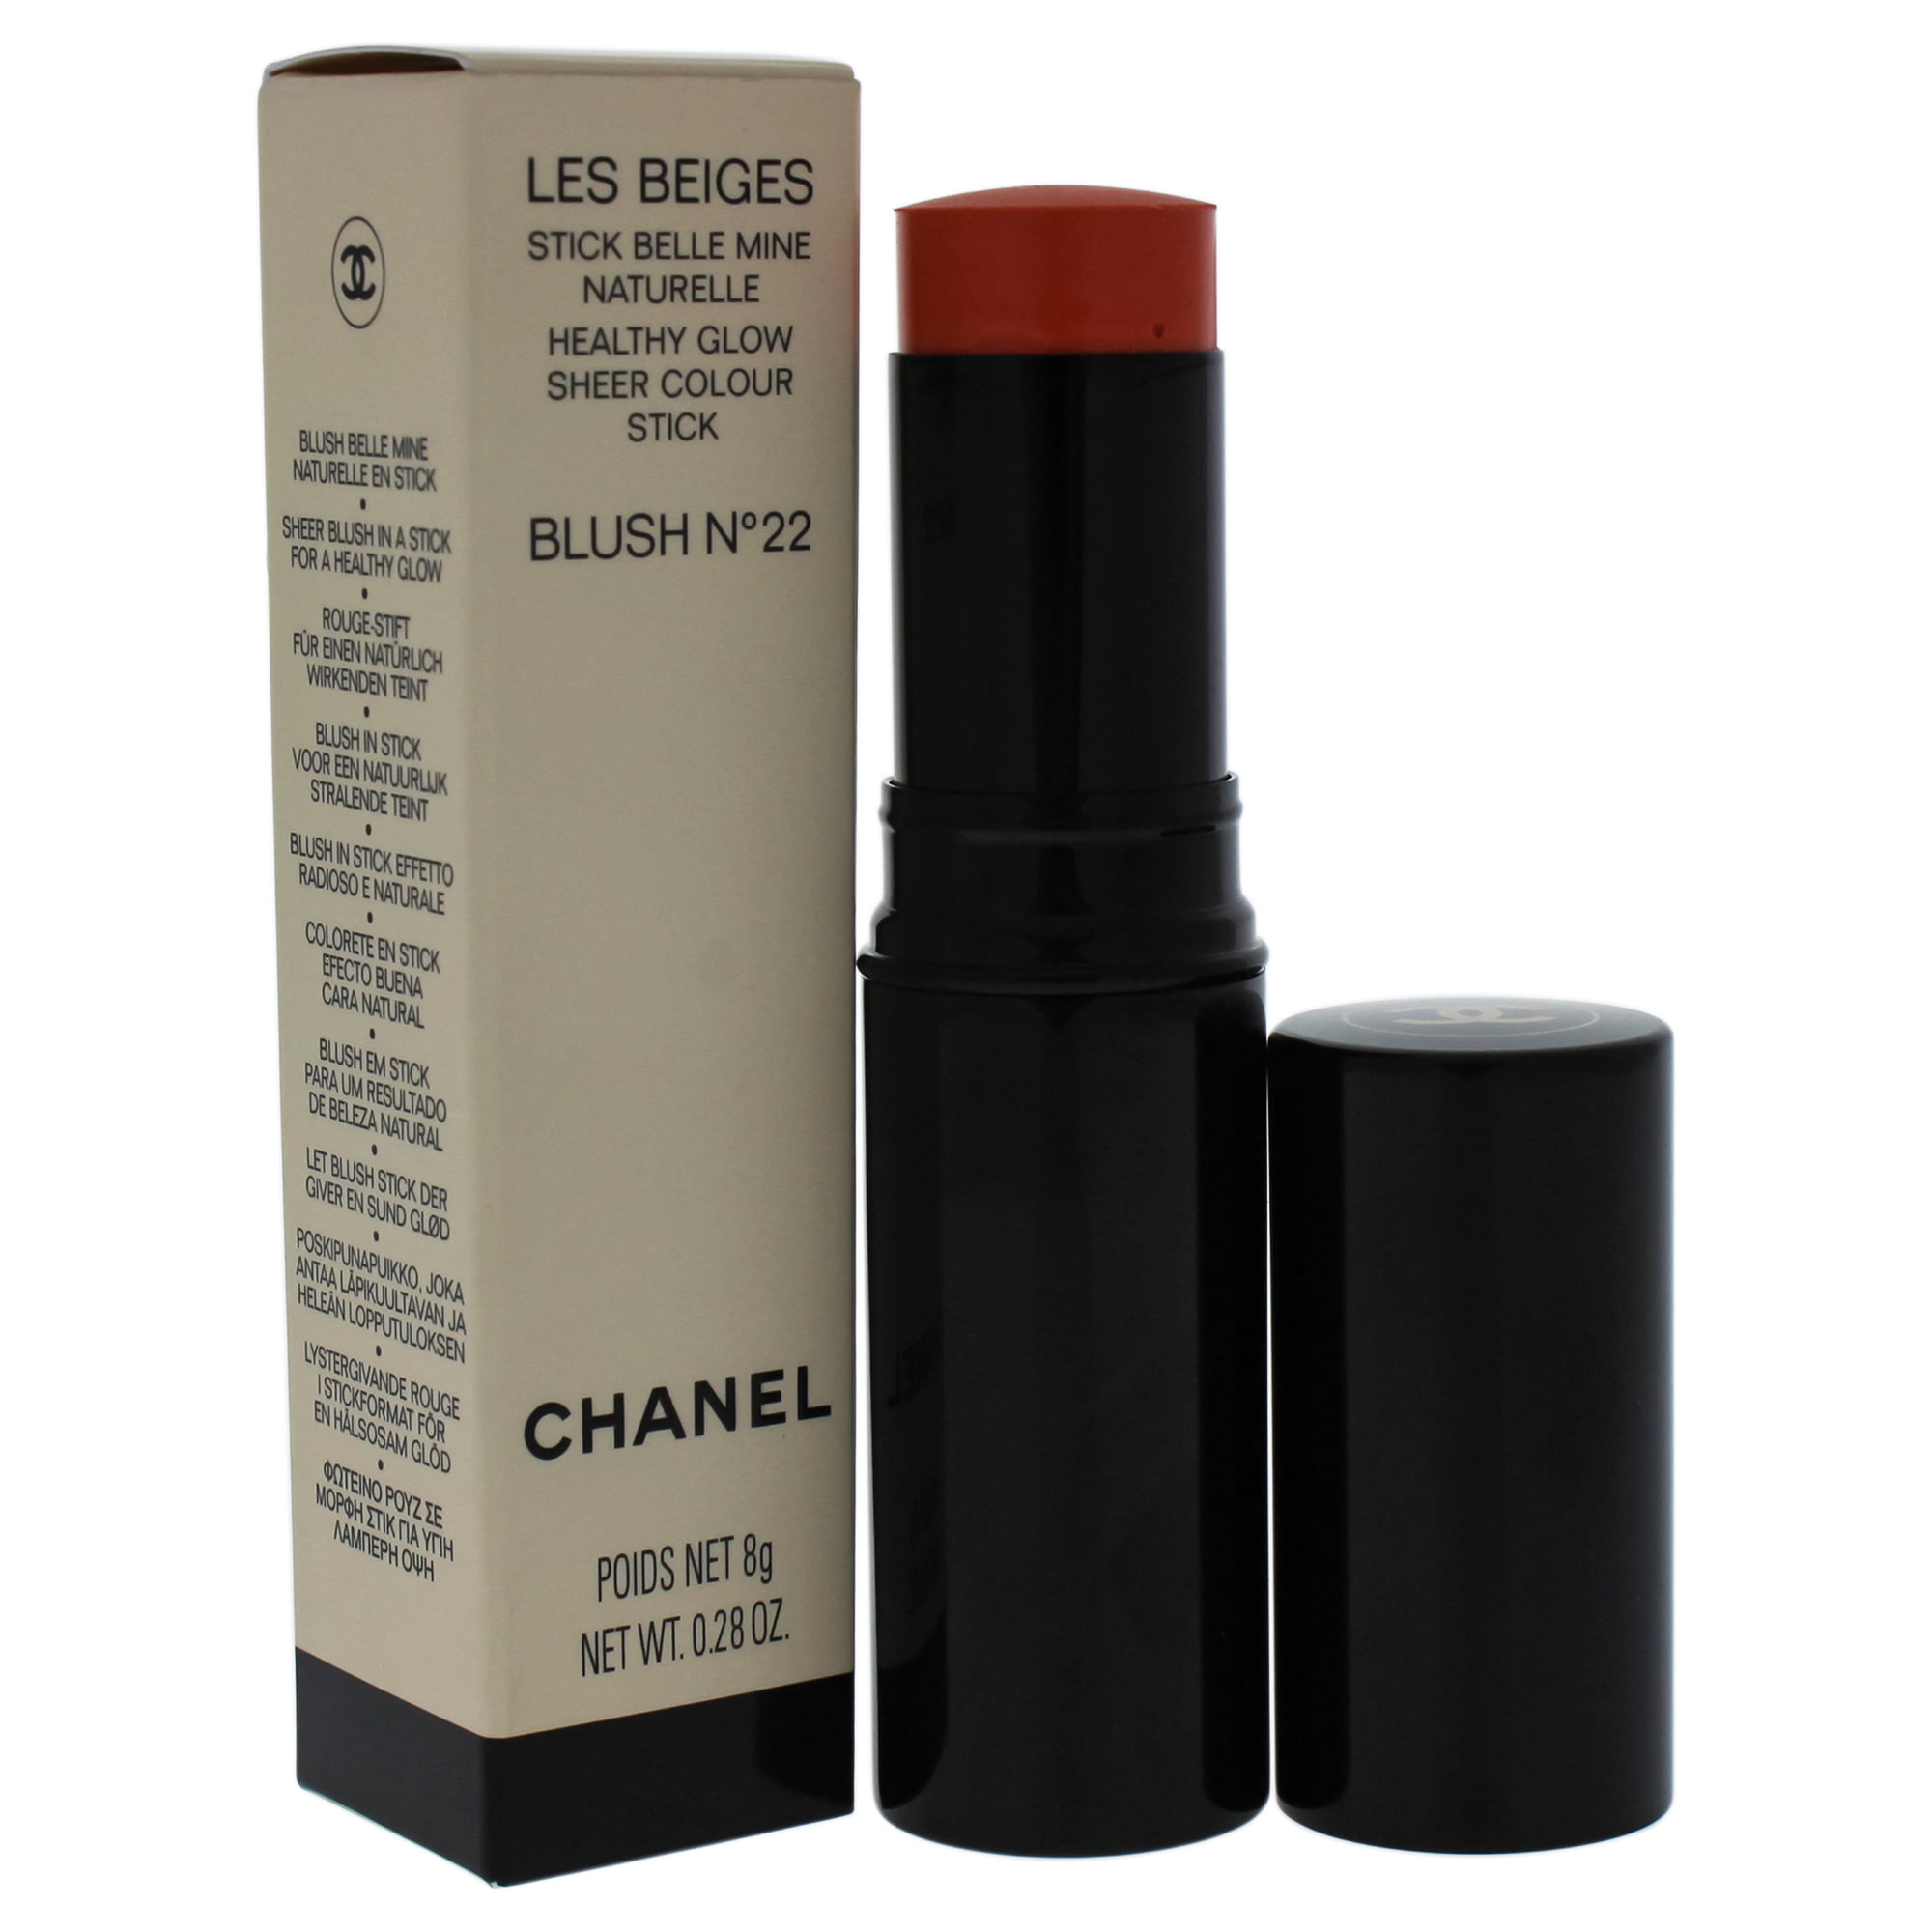 Chanel Les Beiges Healthy Glow Sheer Colour Stick 8g/0.28oz buy in United  States with free shipping CosmoStore